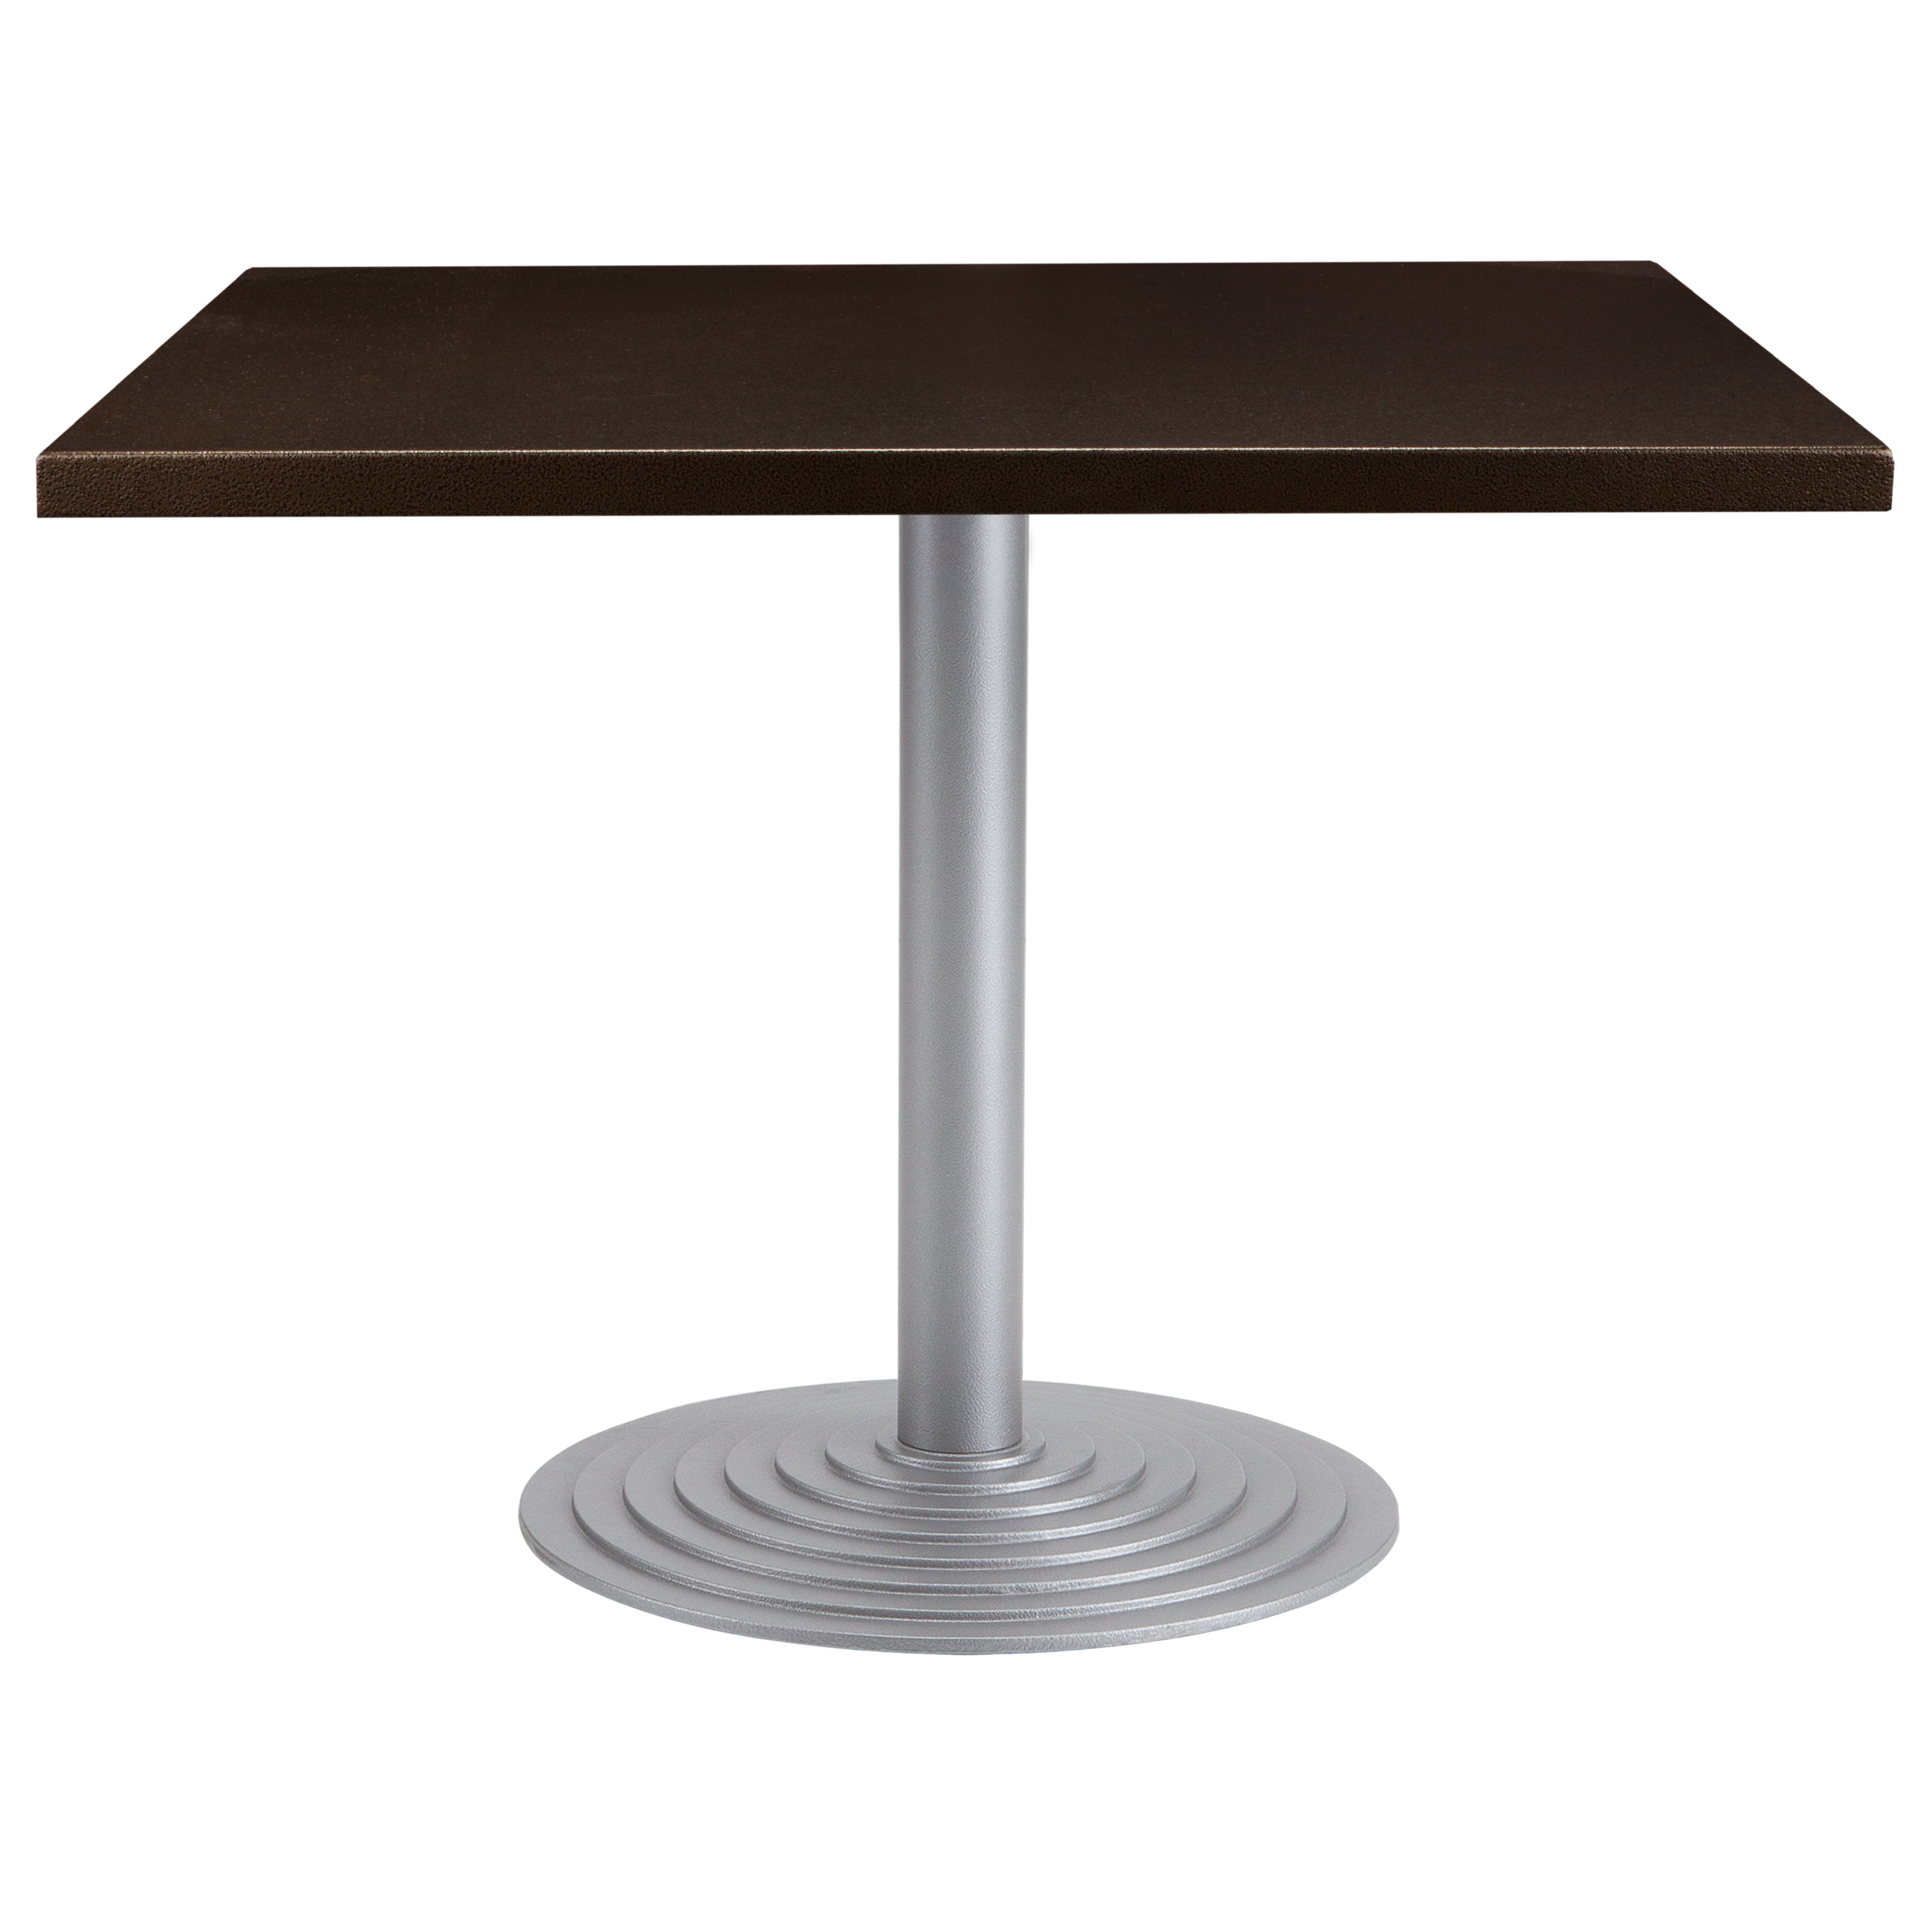 FREEPORT TABLE TOPS
$259.00 – $419.00
CLICK FOR SPEC SHEET
